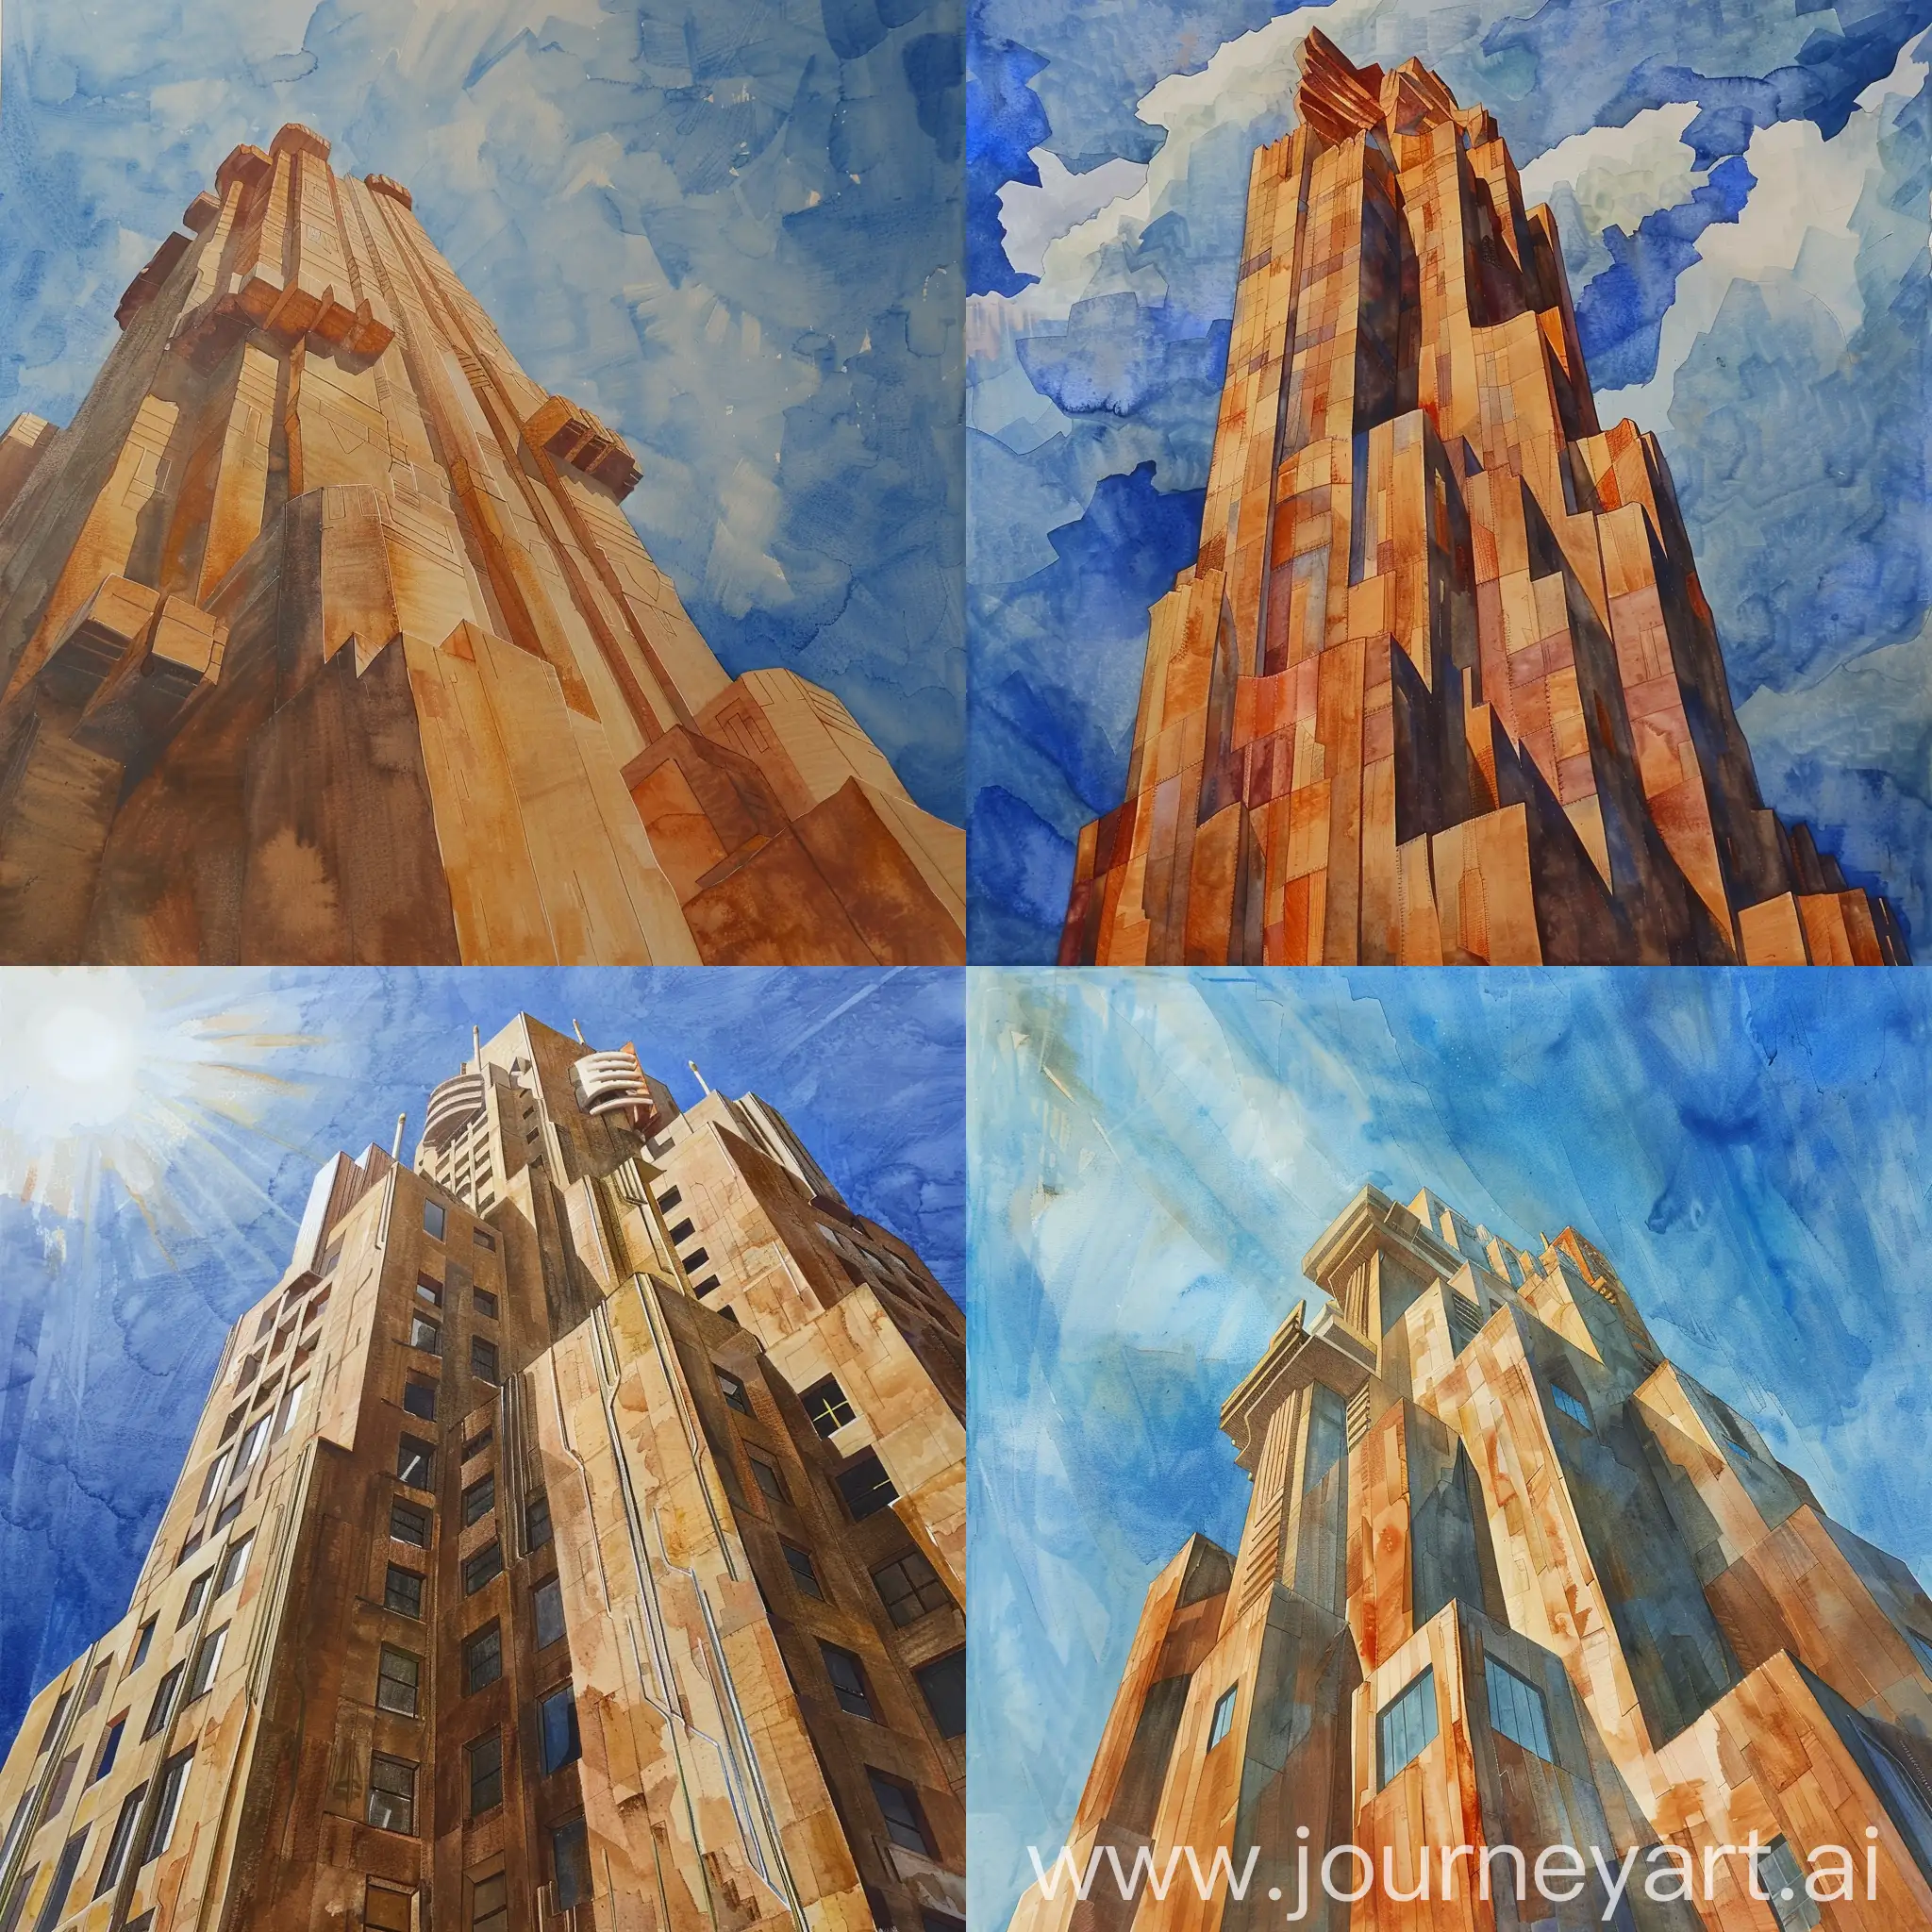 art deco skyscraper made in untreated wood, sunny day, aquarell painting